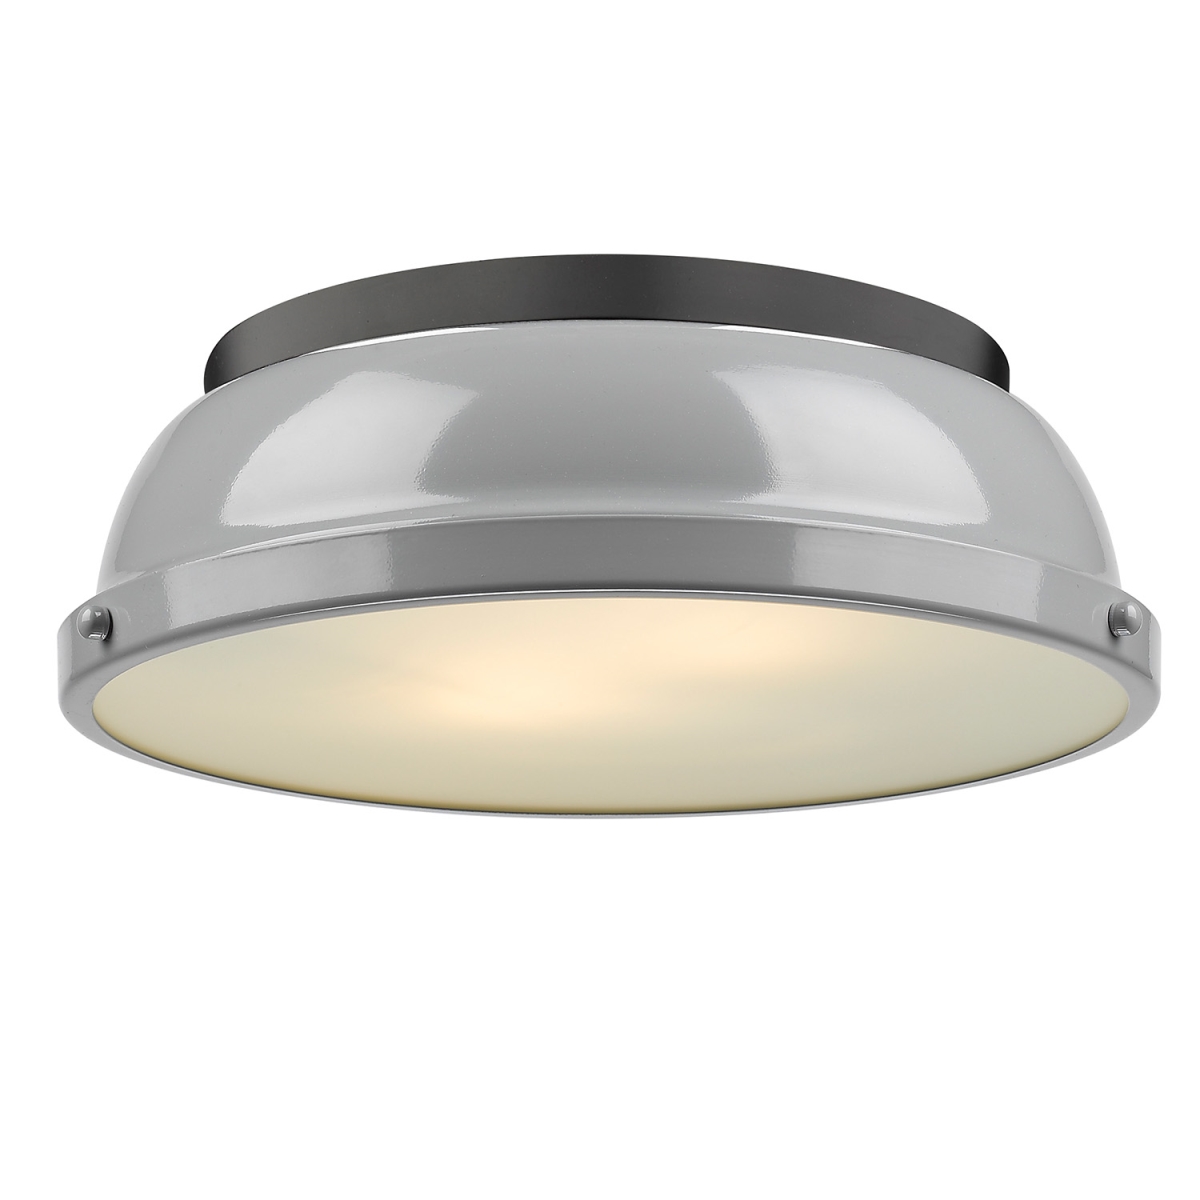 3602-14 Blk-gy Duncan 14 In. Flush Mount Light With Gray Shade, Black